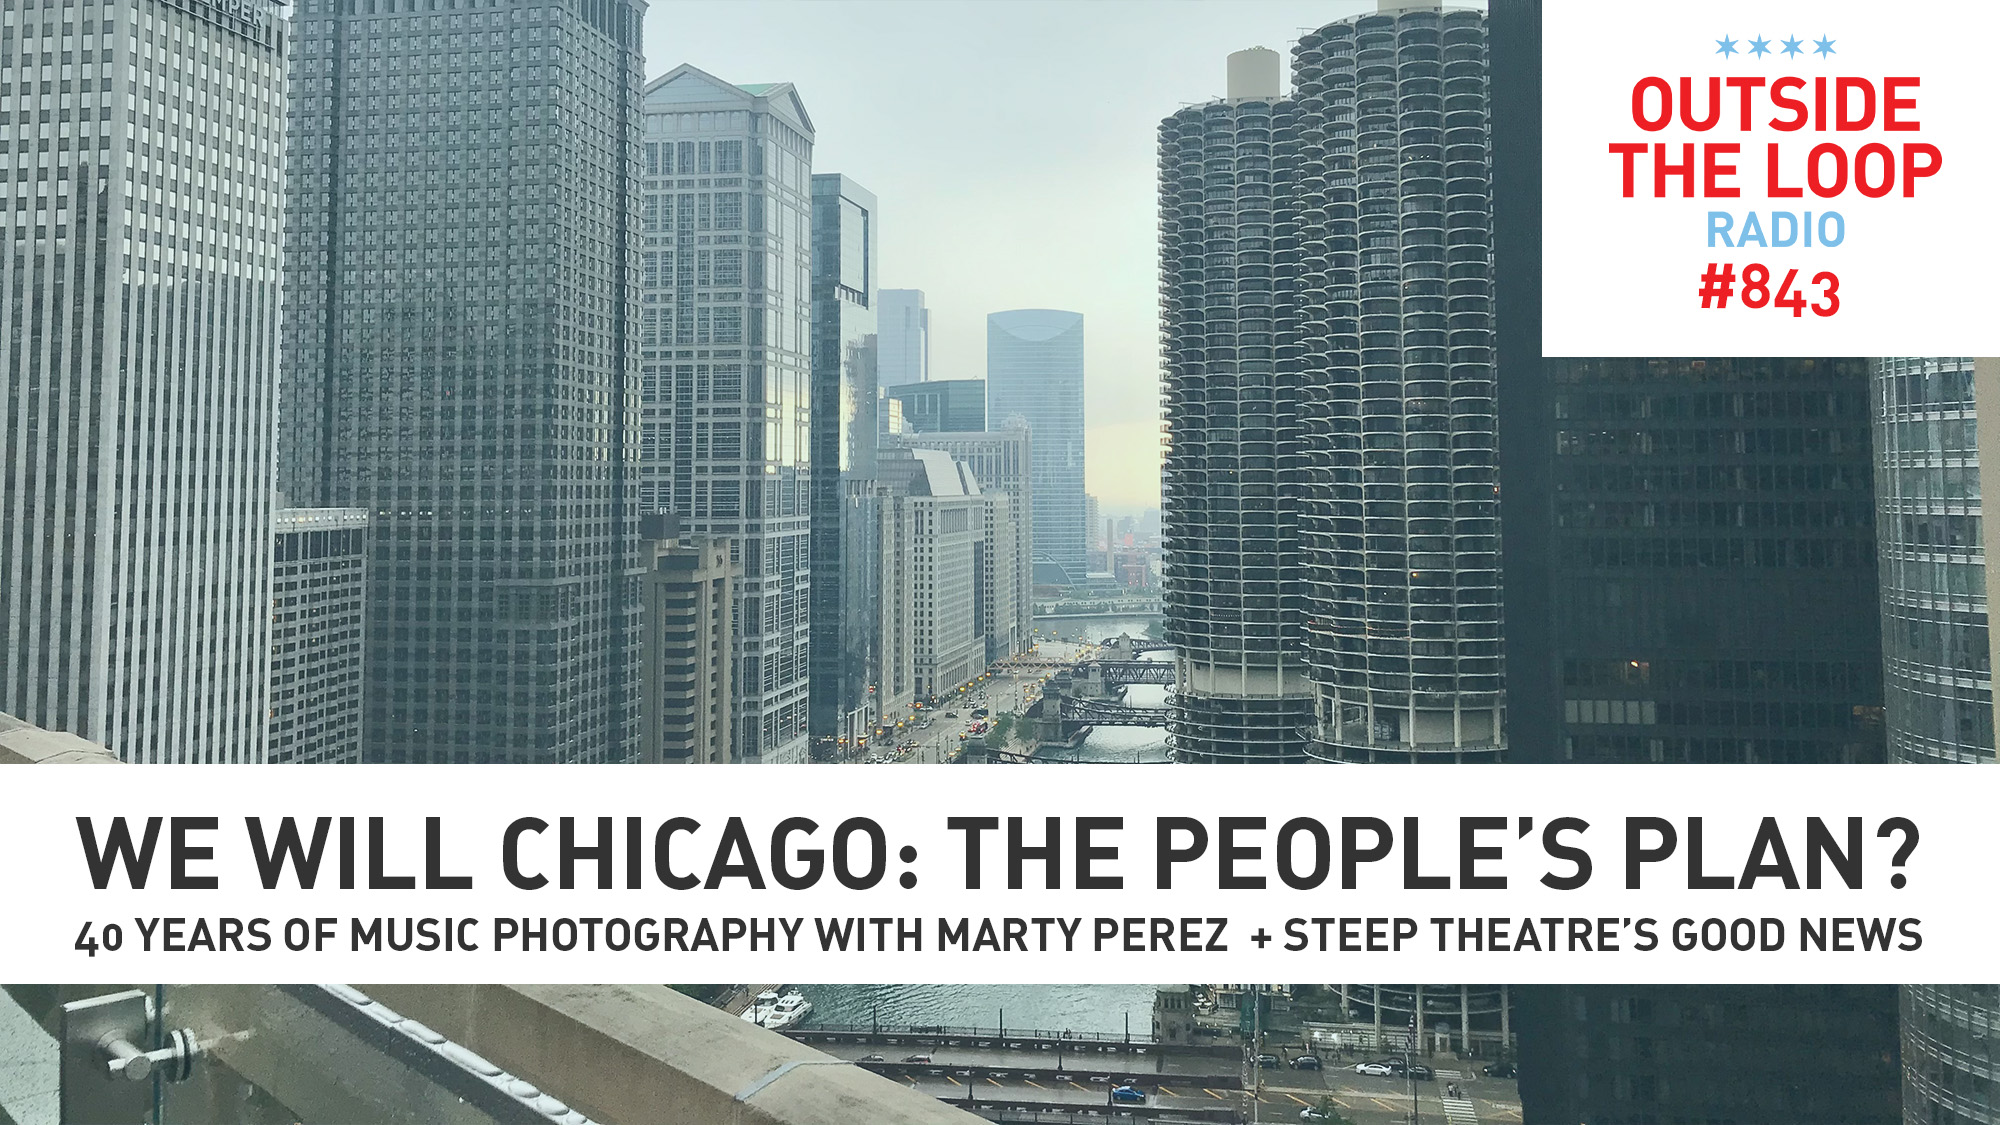 Is “We Will Chicago” the people’s plan? (Photo credit: Mike Stephen/WGN Radio)